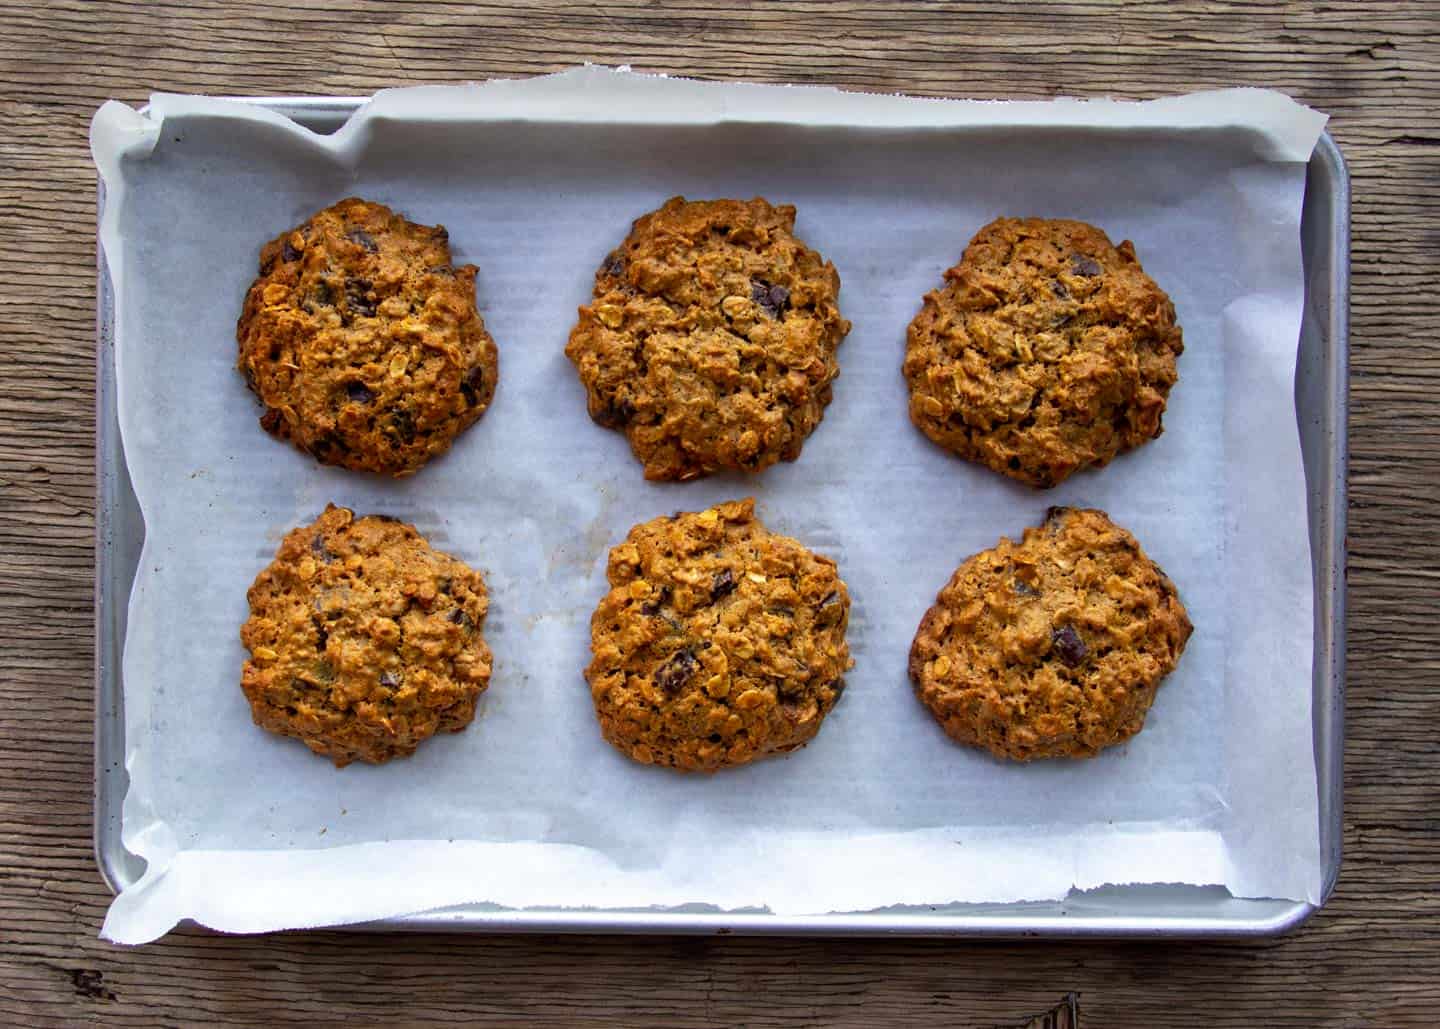 baked peanut butter oatmeal cookies on baking tray.